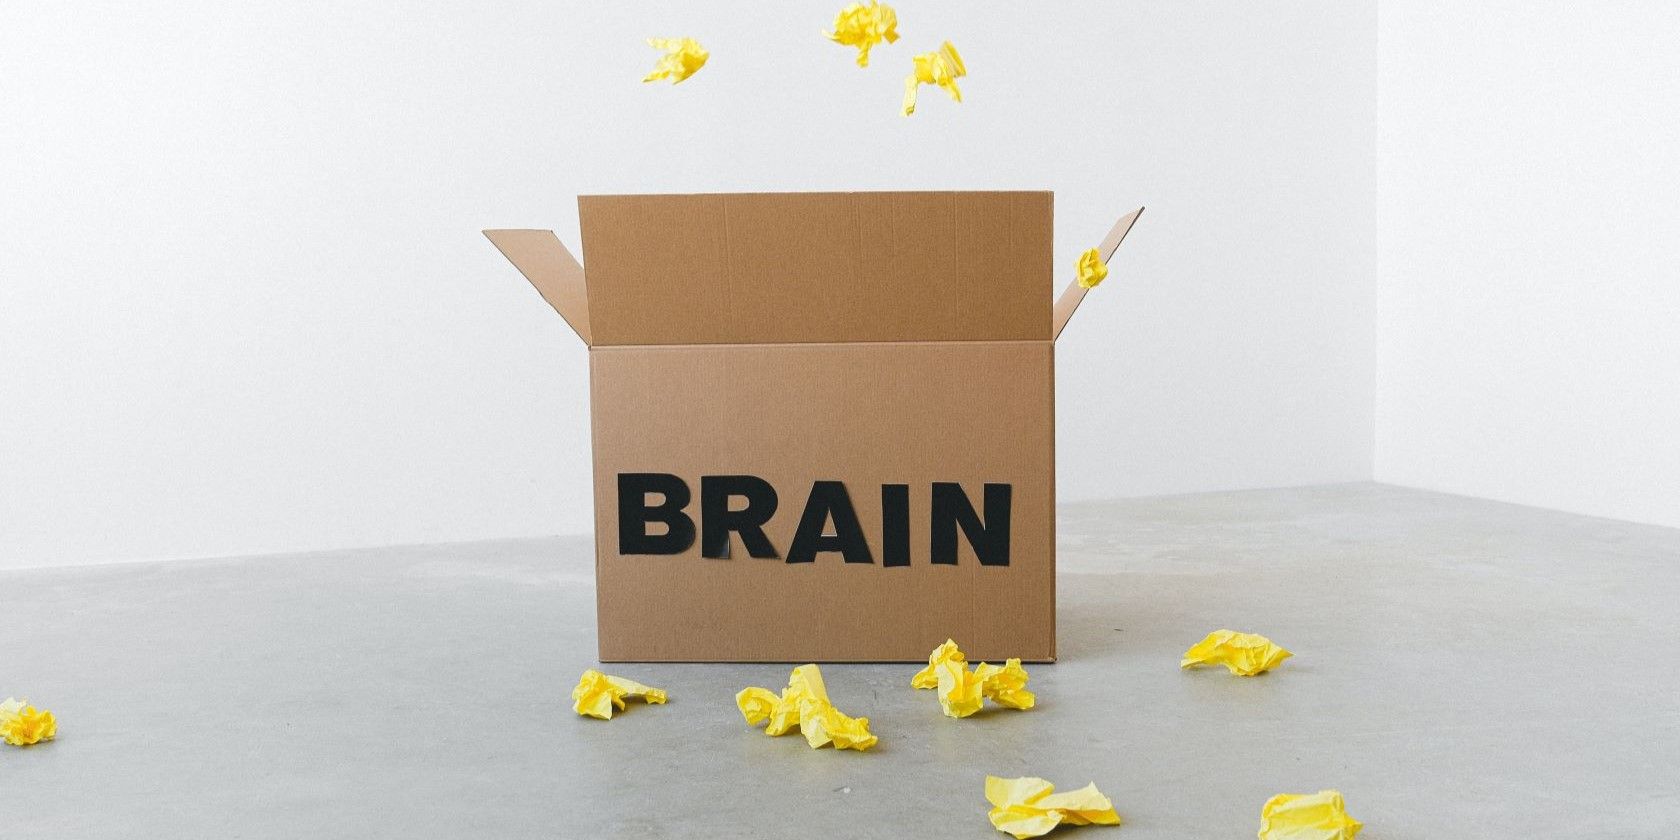 Box labelled 'BRAIN' overflowing with notes